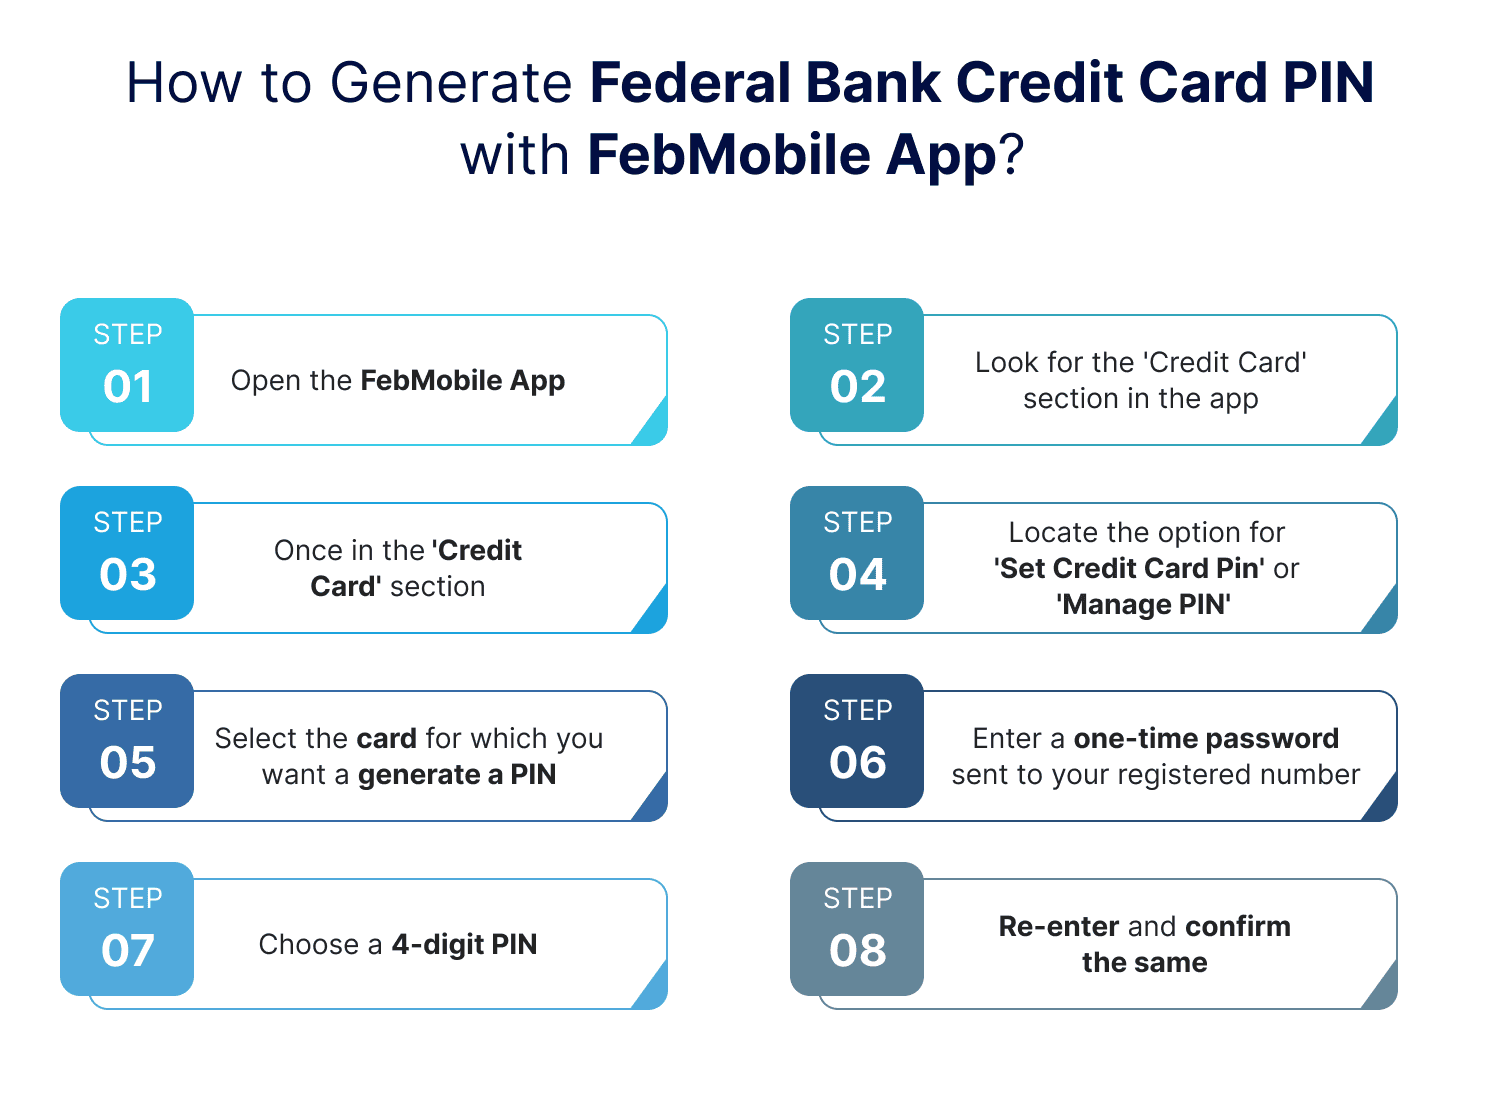 How to Generate Federal Bank Credit Card PIN with FebMobile App